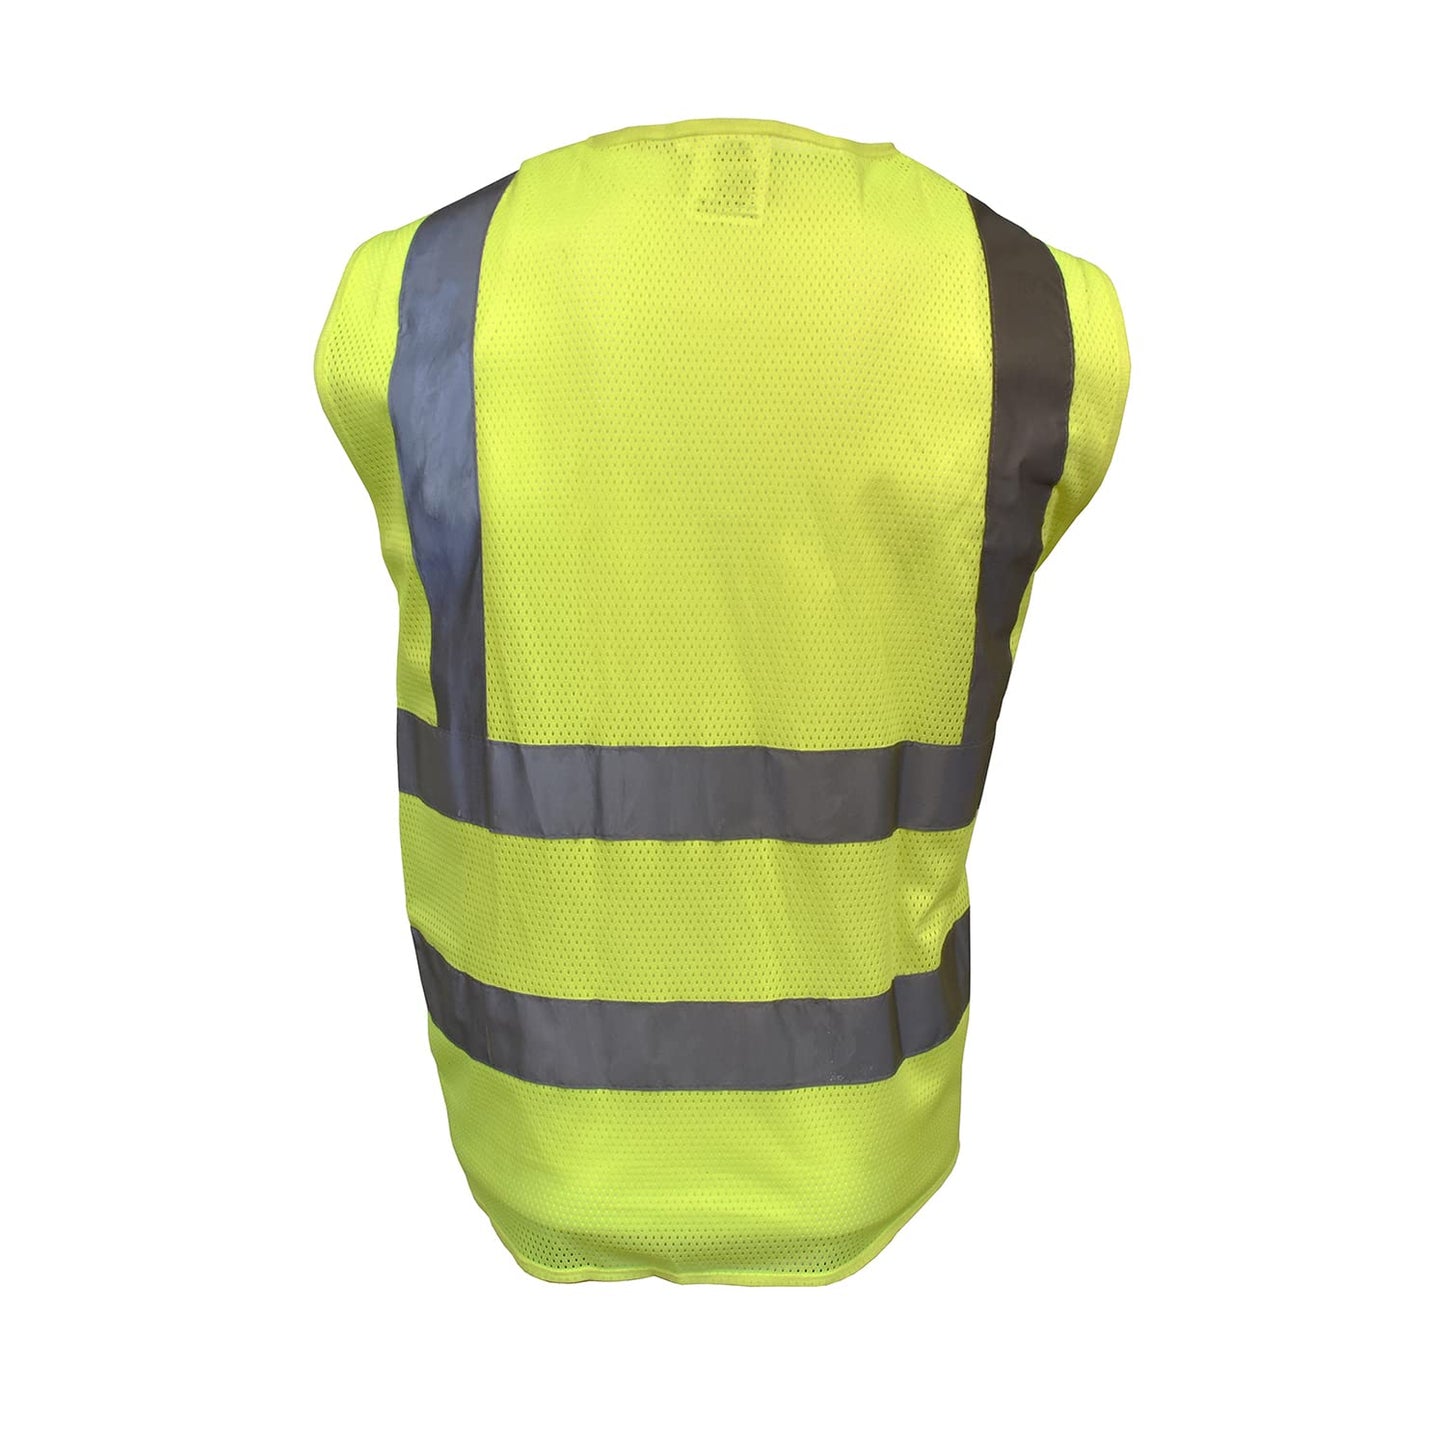 Yellow Type R, Class II, Yellow Mesh Safety Vest, Reflective High-Visibility